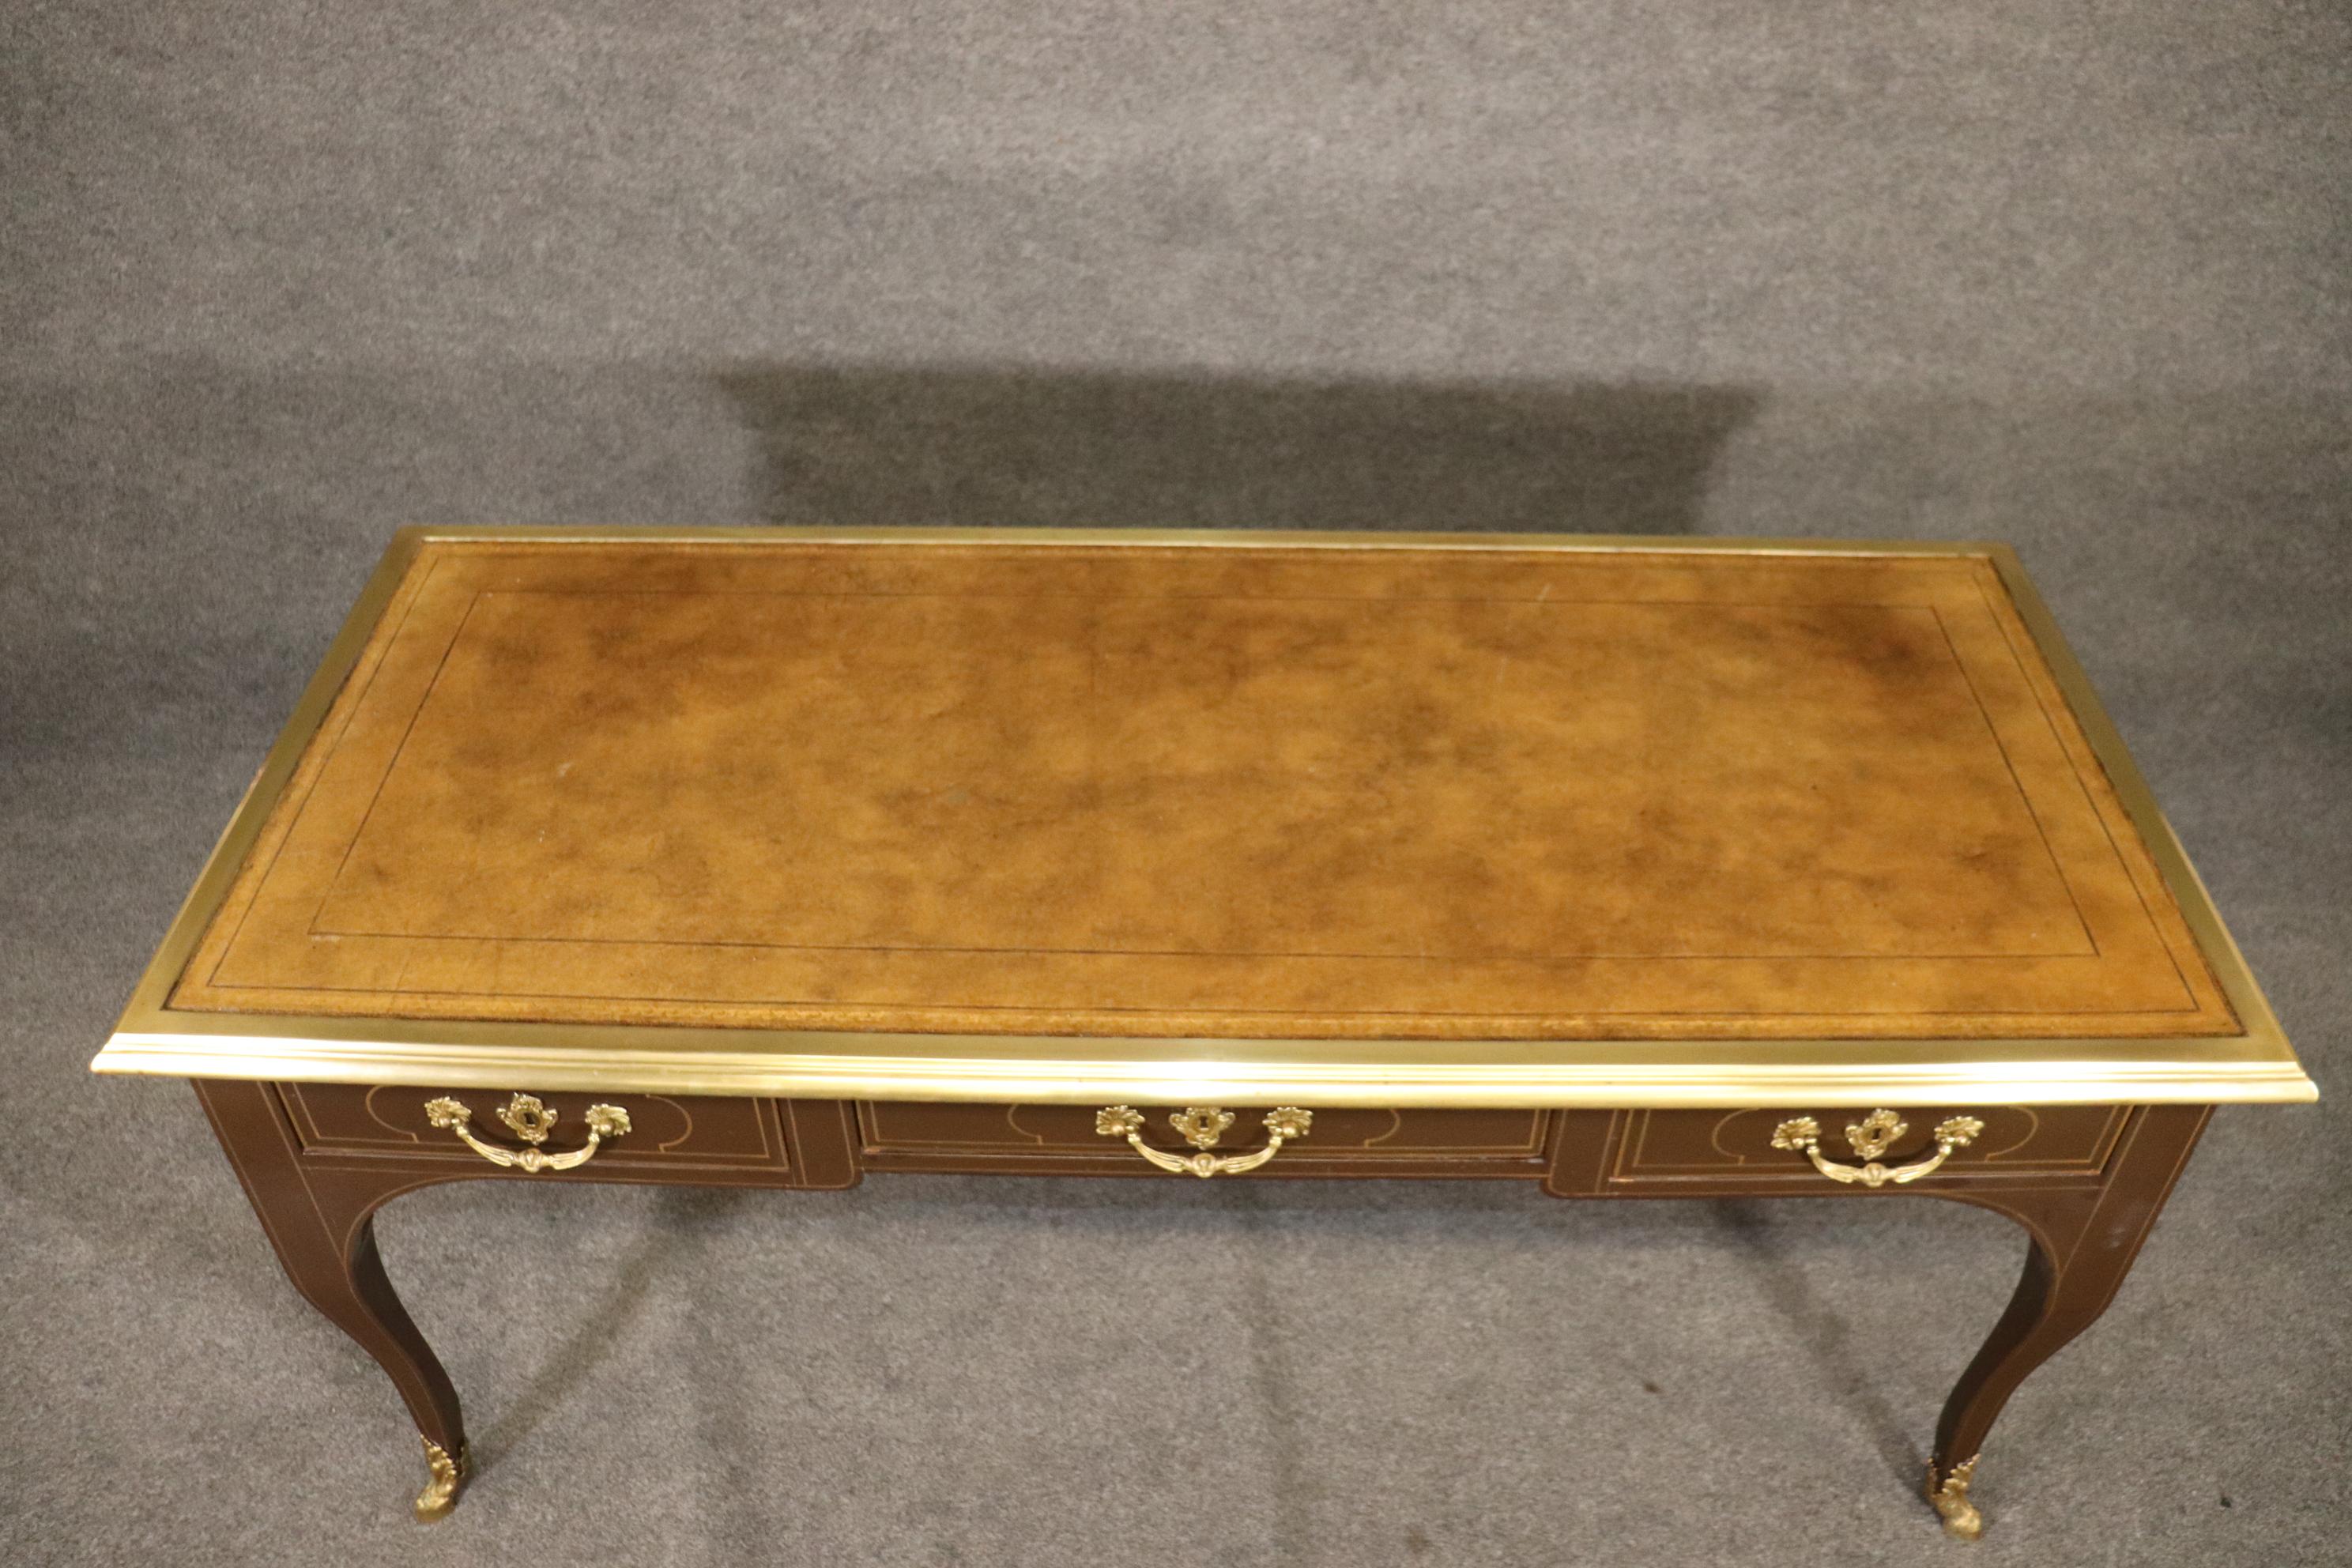 Brass Bound Leather Top Louis XV Bureau Plat Baker Collector's Edition Desk In Good Condition For Sale In Swedesboro, NJ